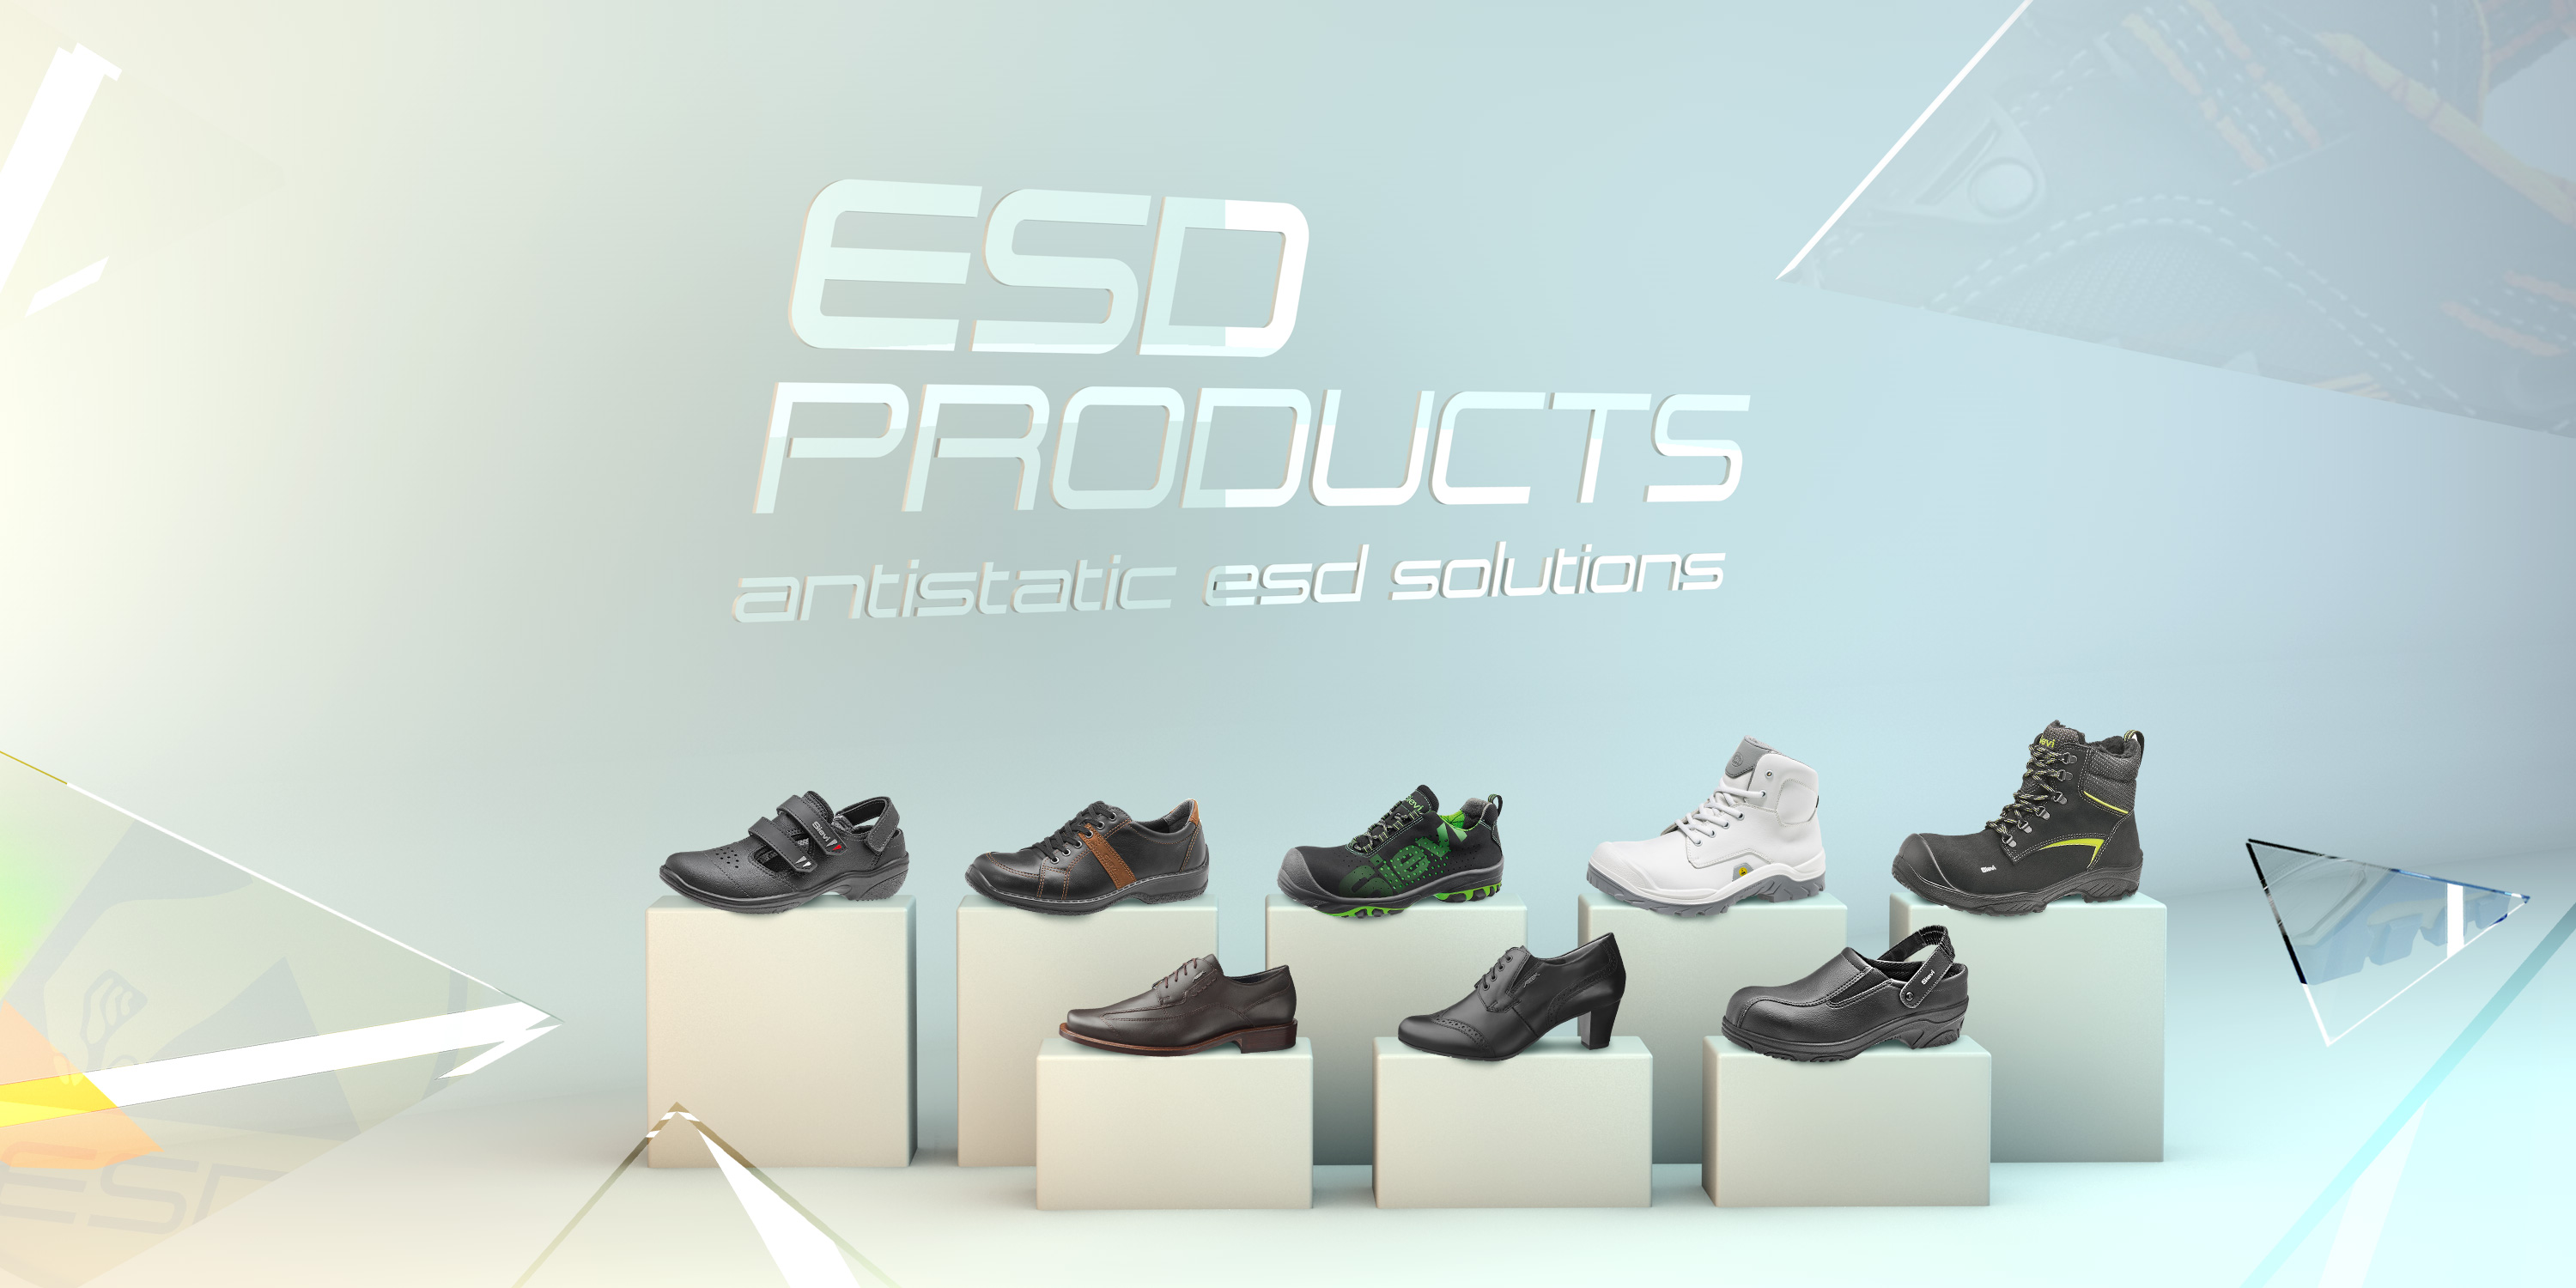 Antistatic ESD Work Shoes ESD Safety Electric Static Dissipative Footwear Conductive Anti Static antistatic AES 